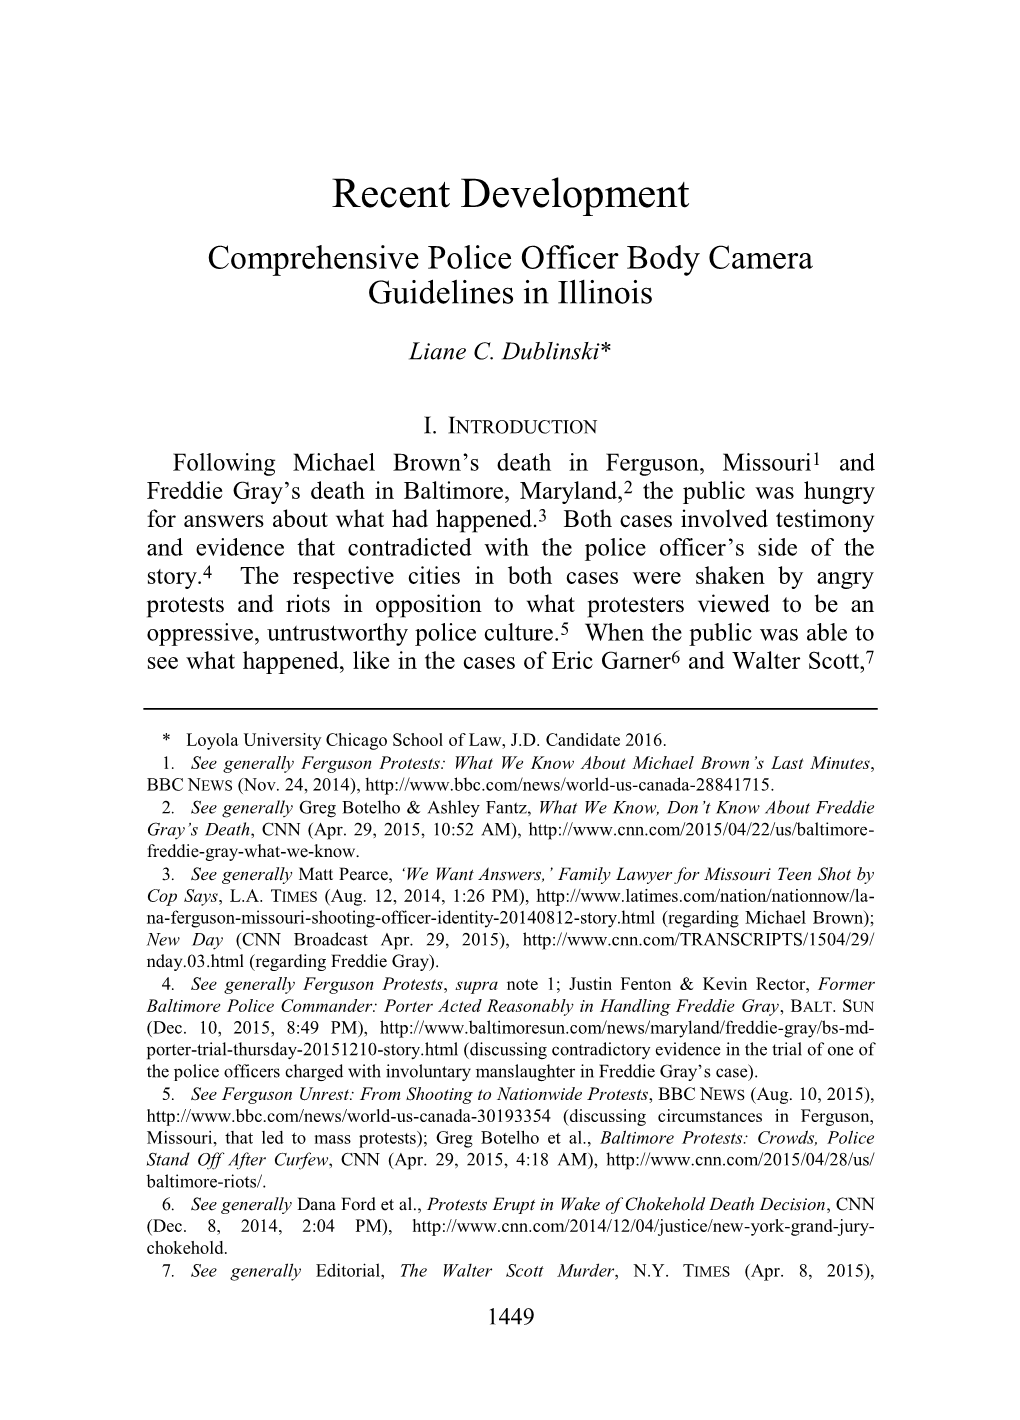 Comprehensive Police Officer Body Camera Guidelines in Illinois